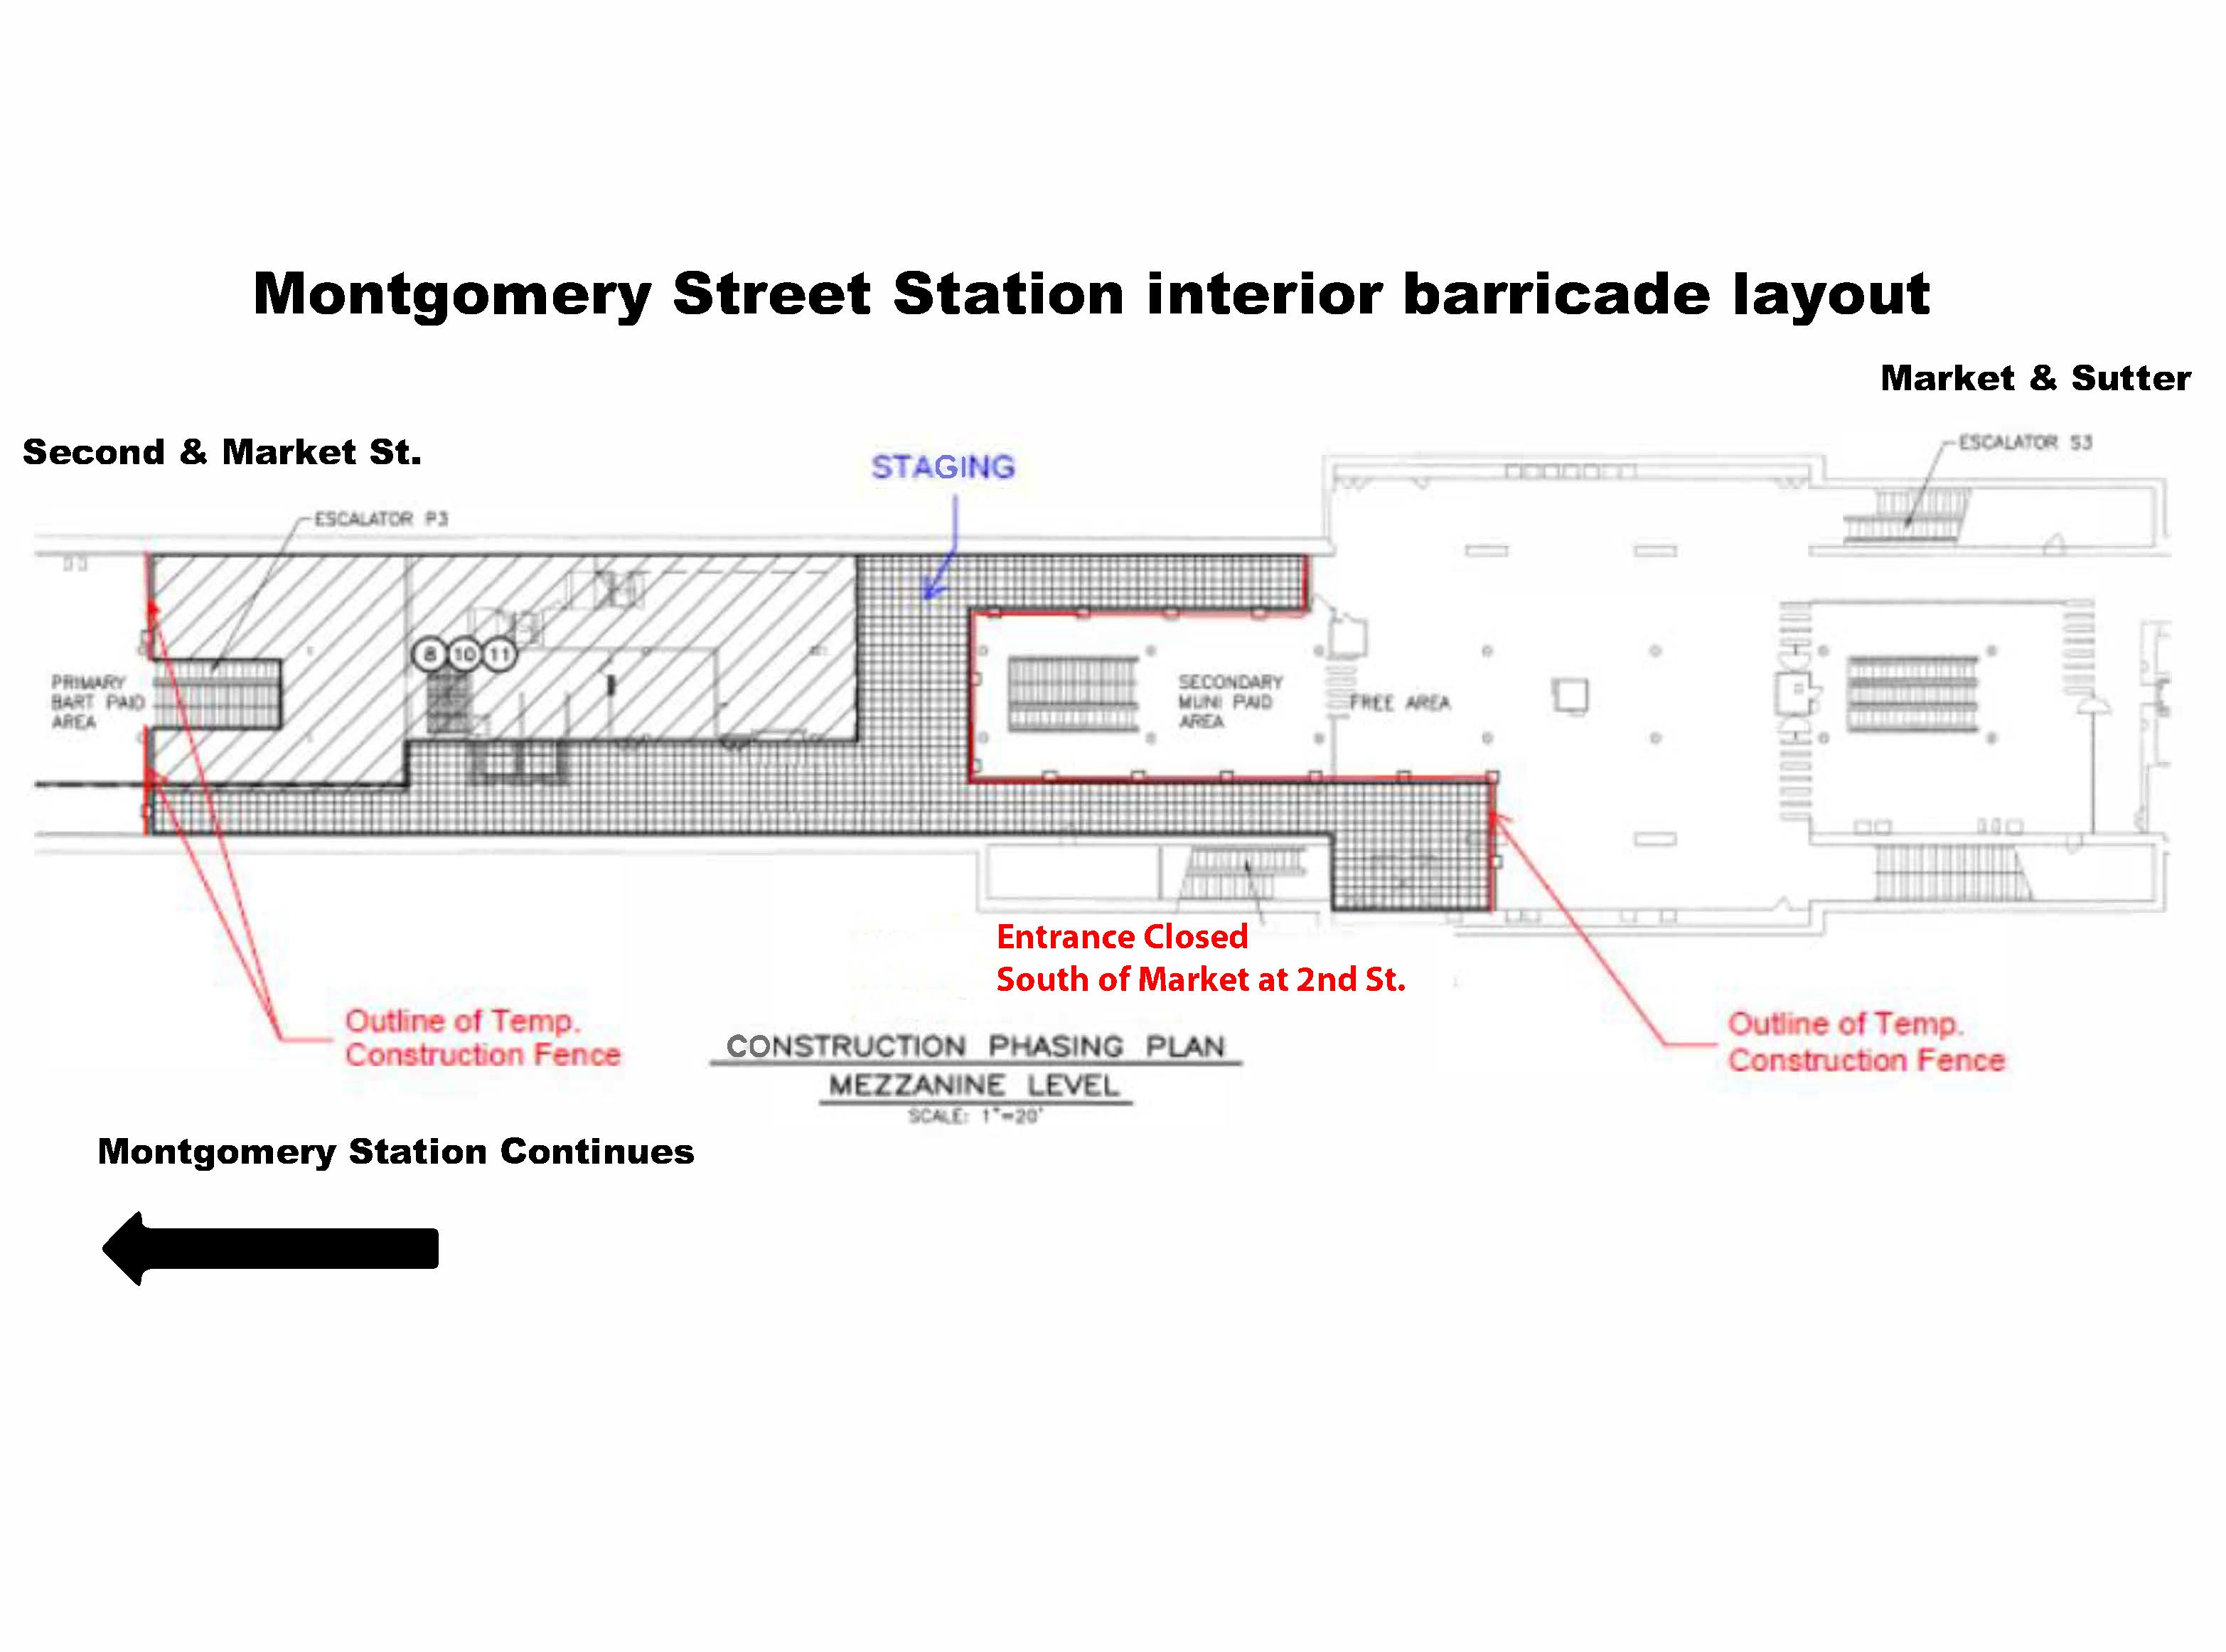 Montgomery Station entrance closed and limited access through concourse